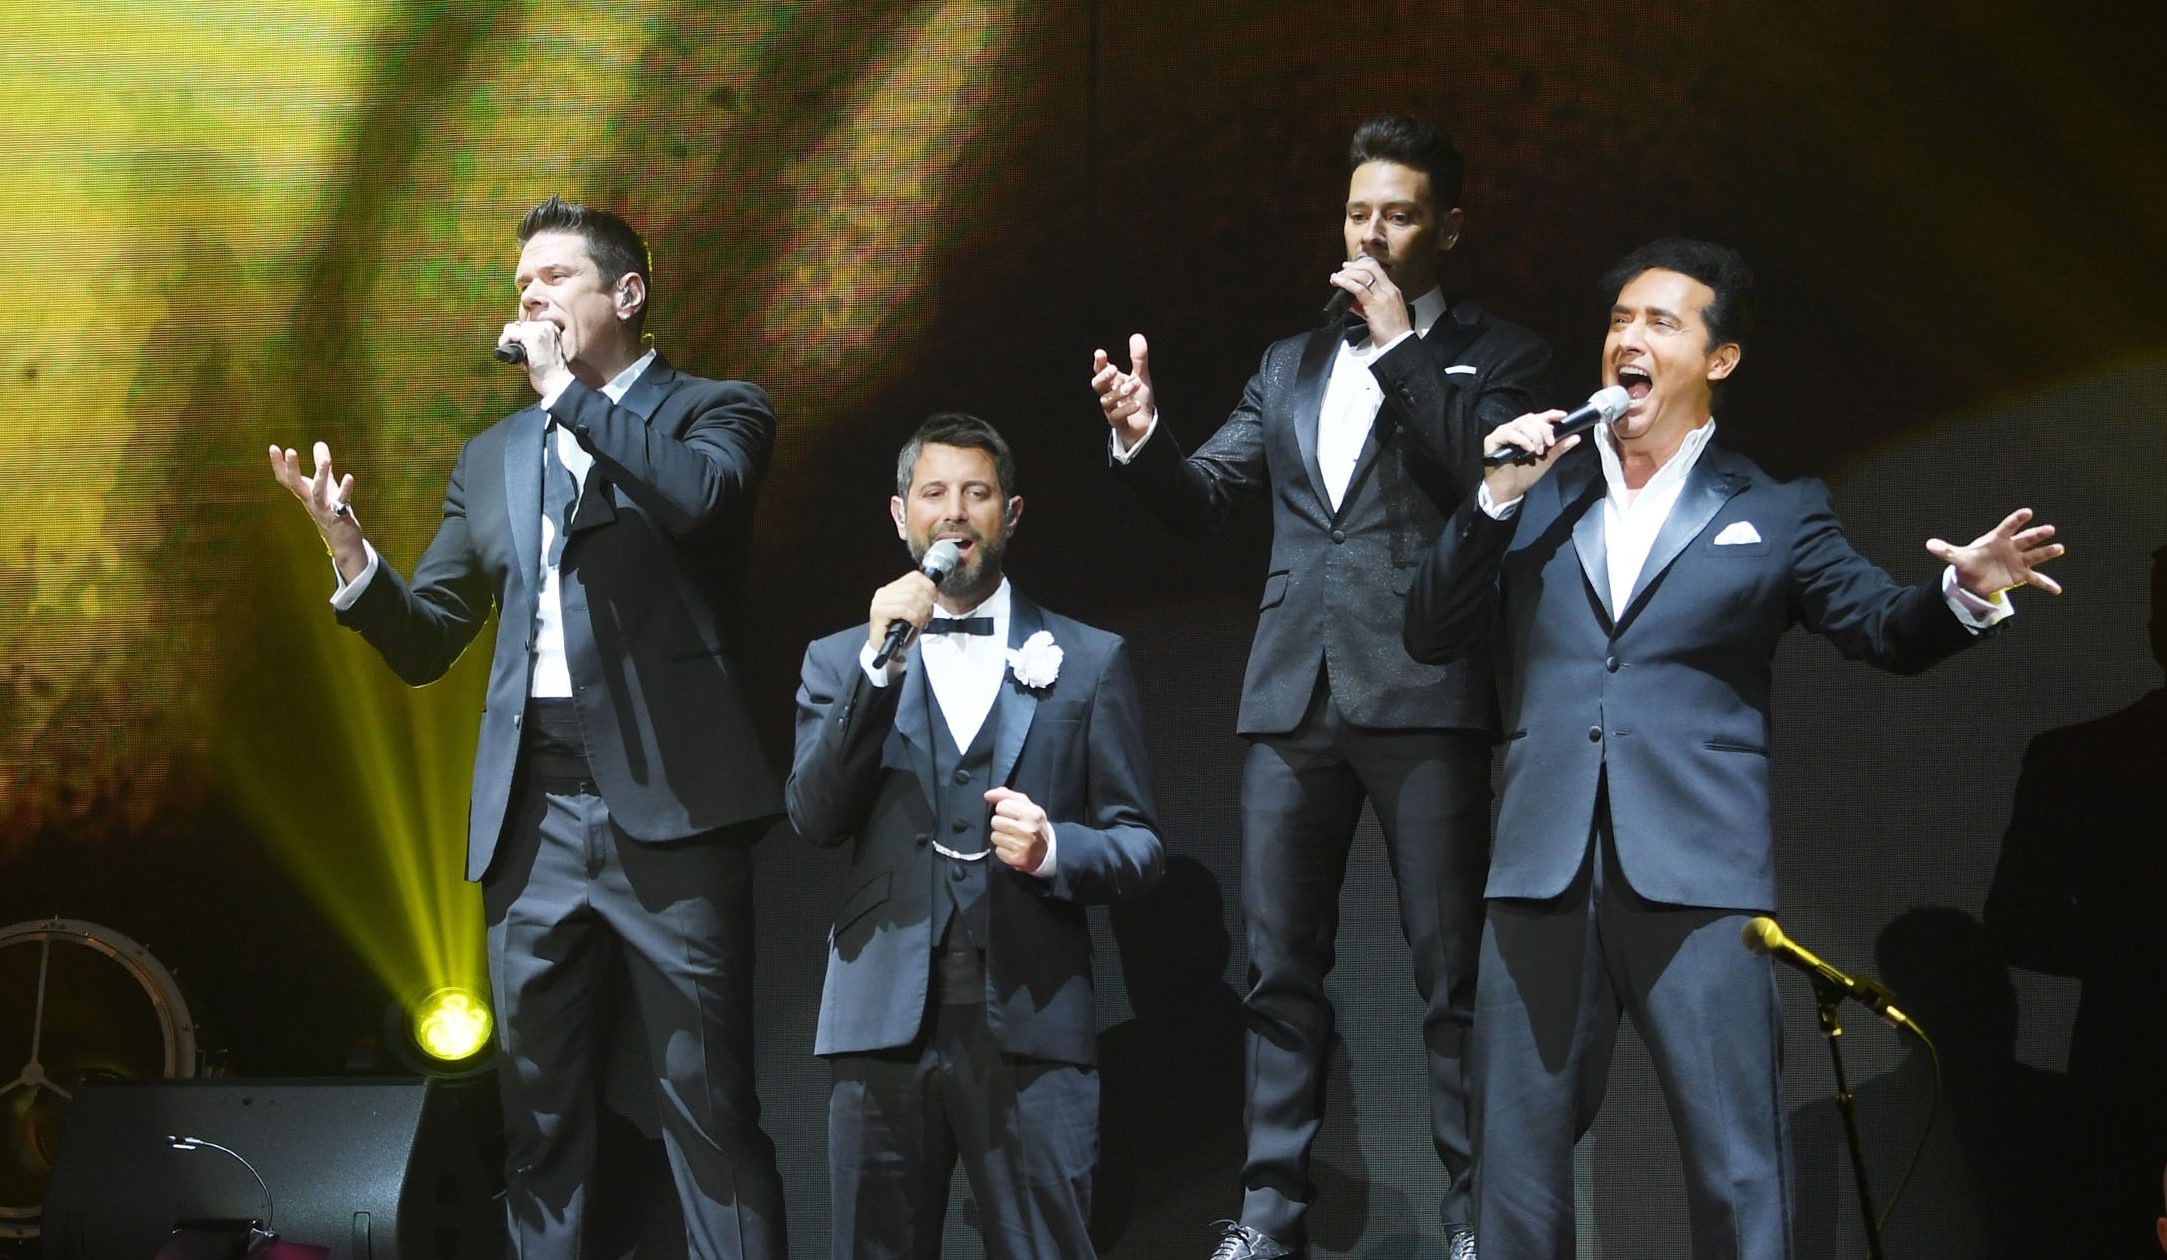 David Miller performs with Il Divo, one of the biggest crossover groups of all time